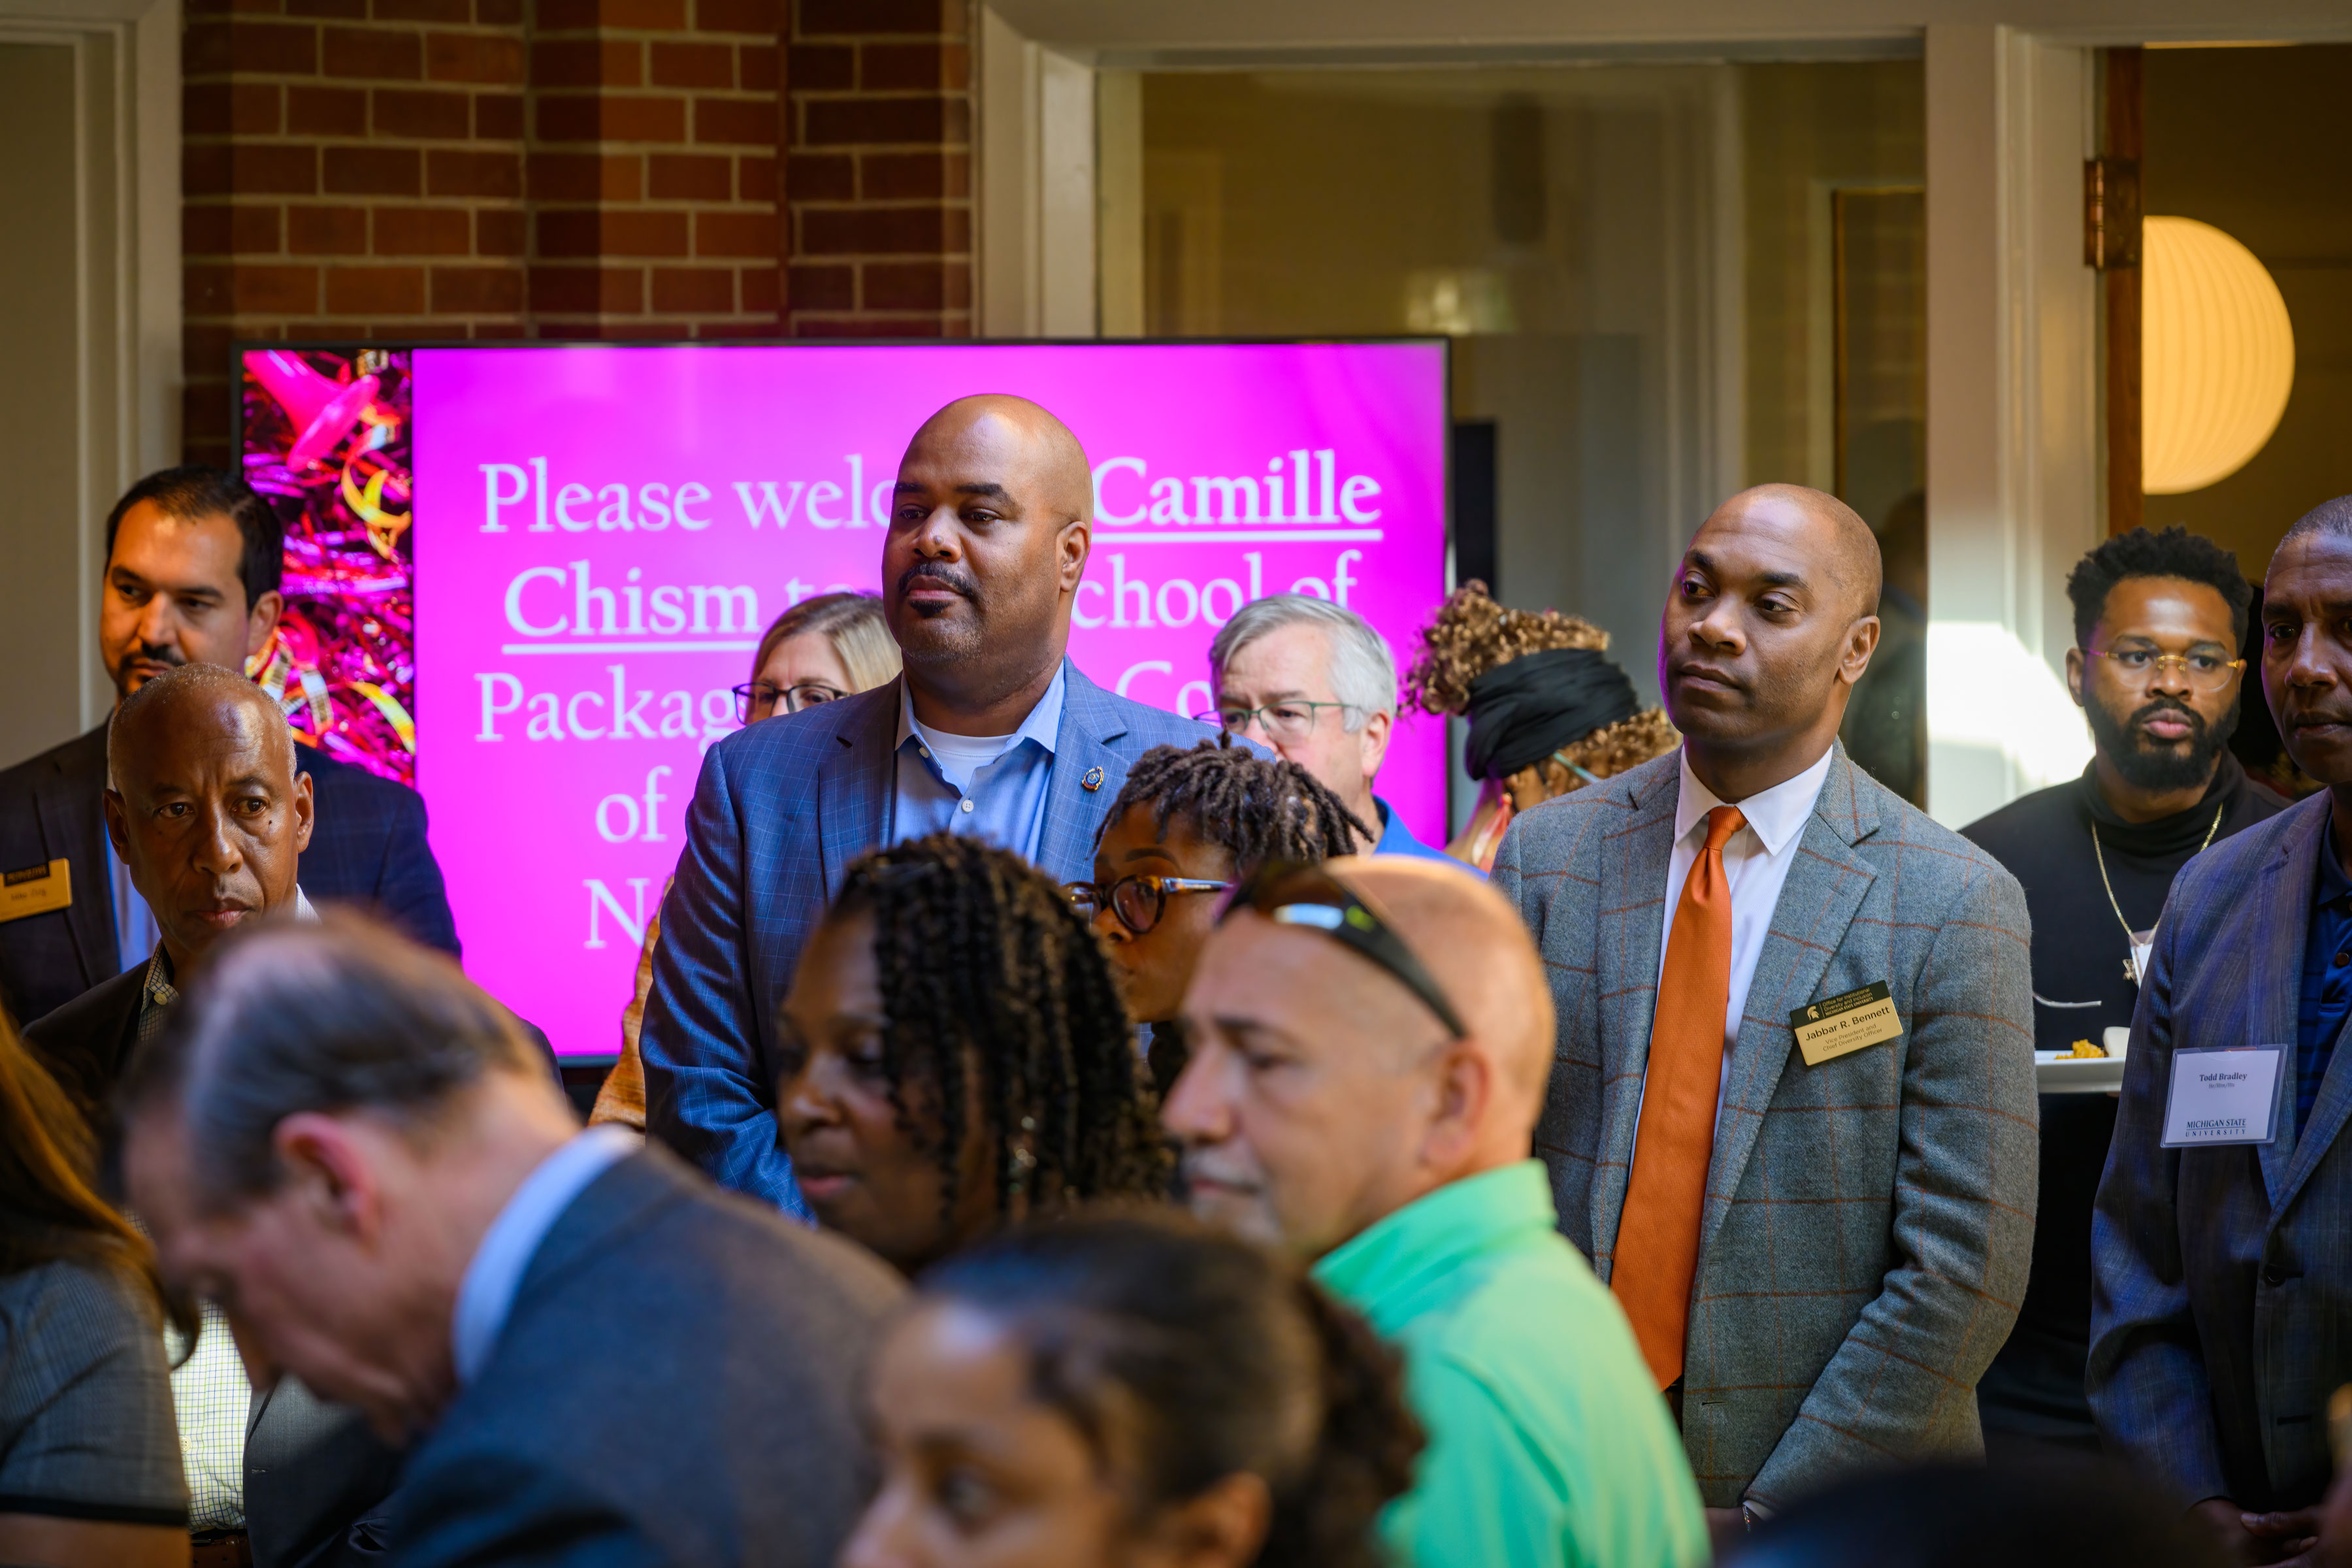 Vennie Gore (middle-left), senior vice president for Student Life and Engagement, Marlon C. Lynch (center), vice president for public safety and chief of police, and Jabbar R. Bennett, Ph.D. (middle-right), vice president and chief diversity officer look on.